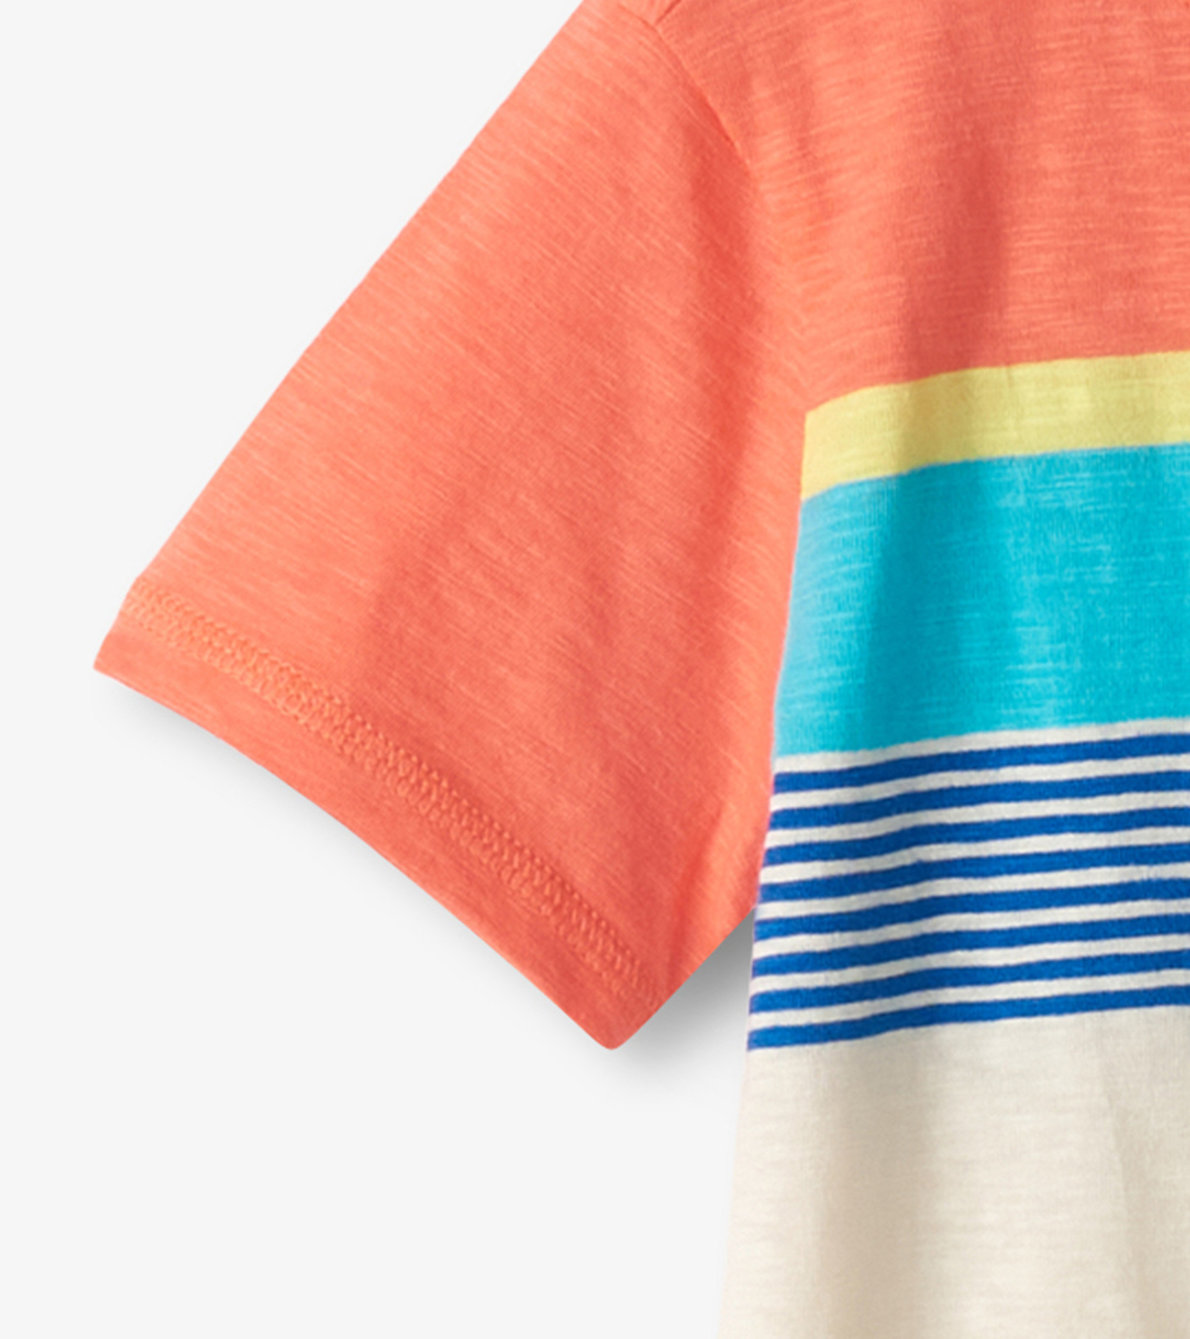 View larger image of Boys Beach Boy Pocket Tee